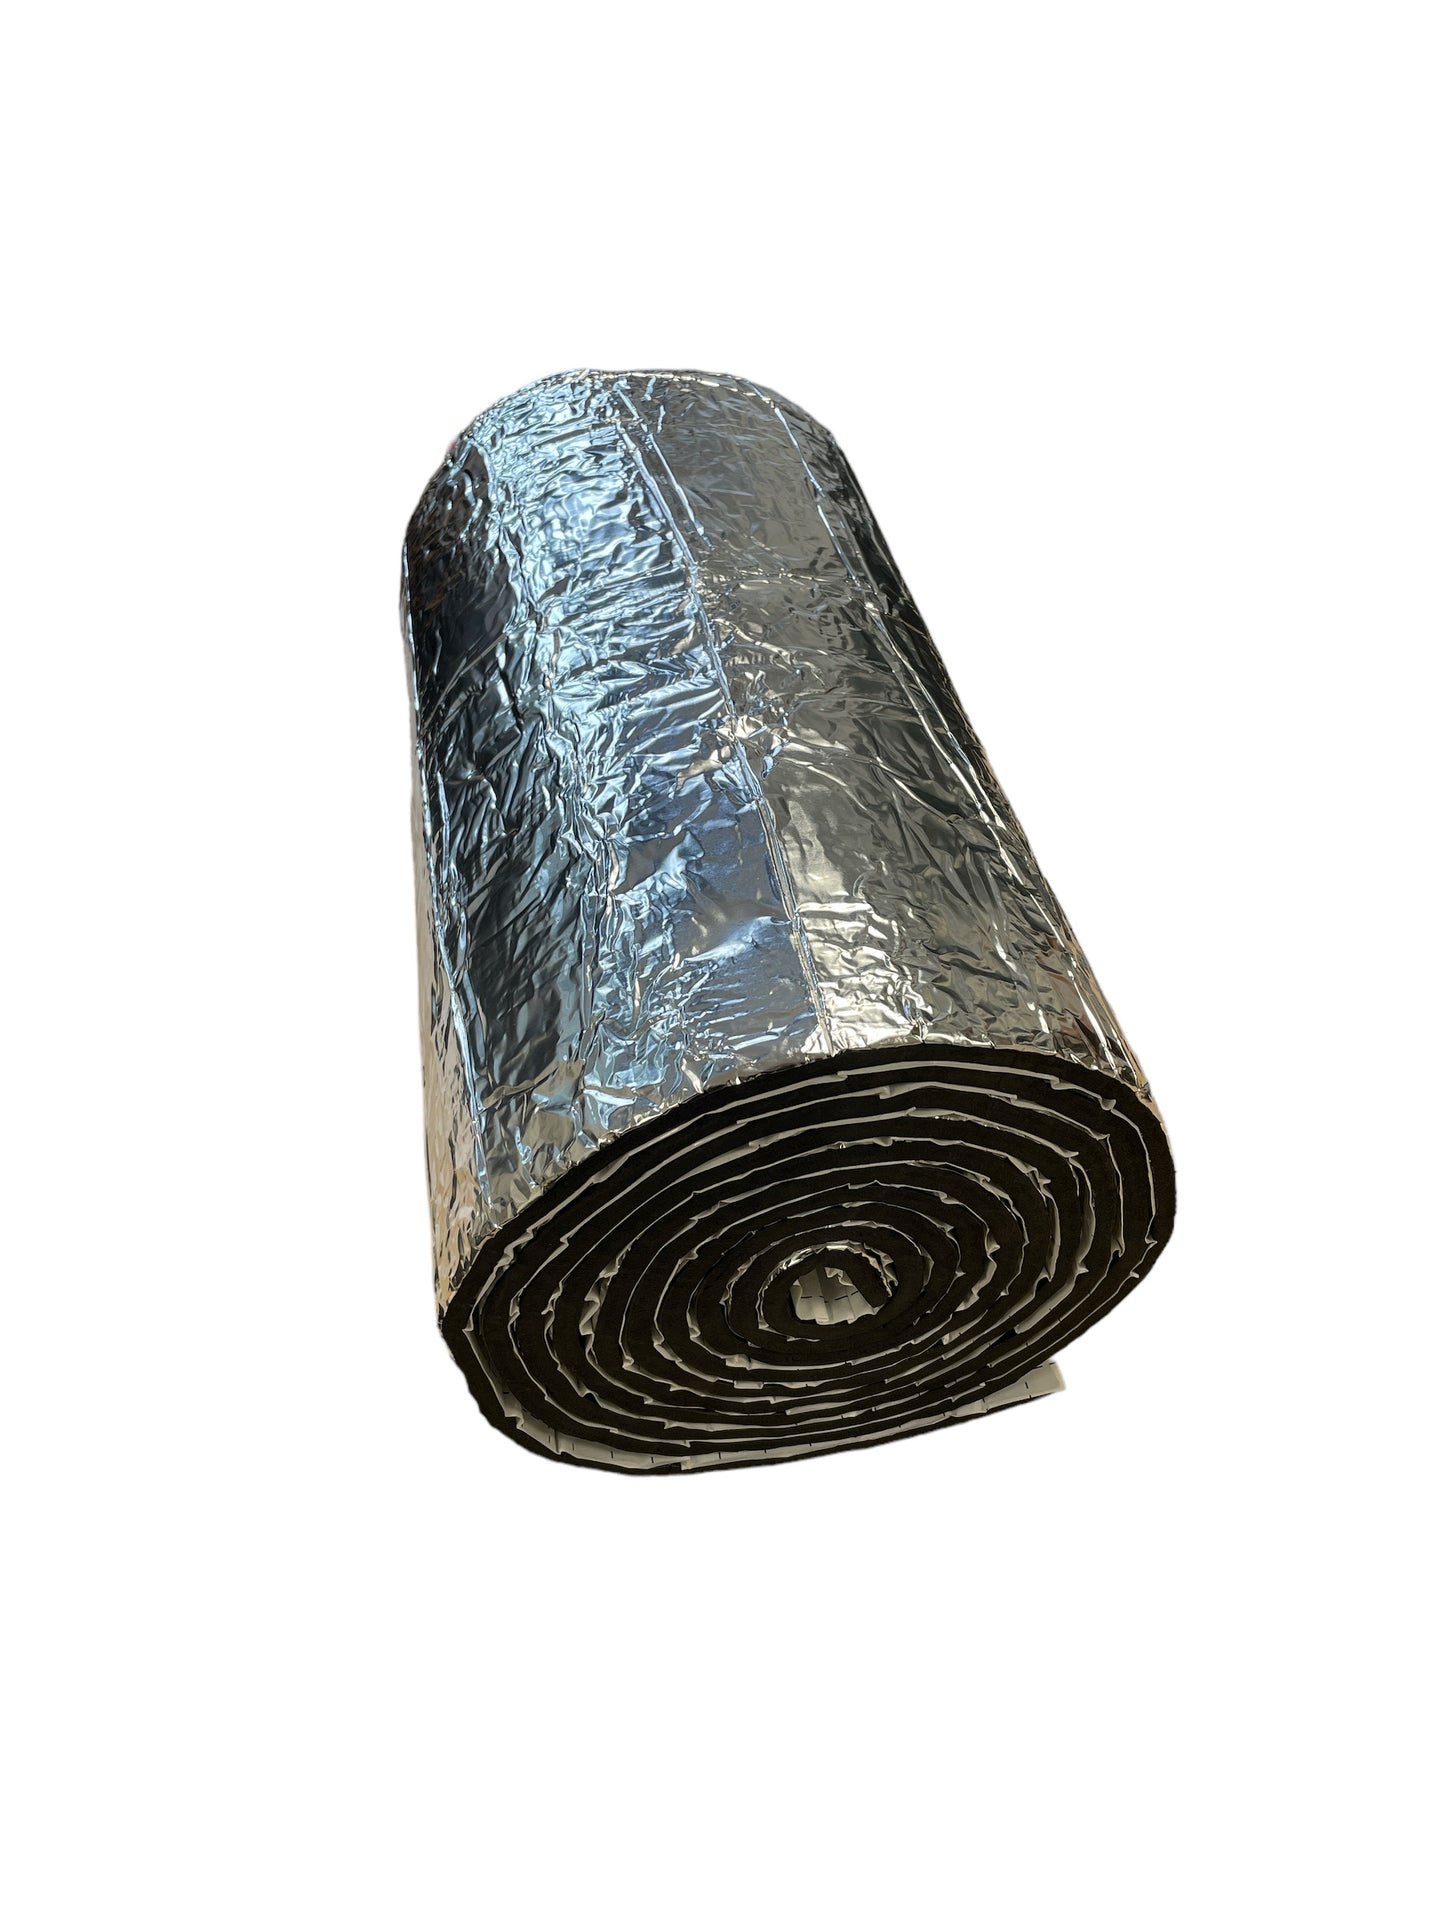 PRO® Thermo Rubber Foam with Foil 10mm Sound Absorbing Thermal Deadn Mat roll 50cm x 5m 2.5sqm